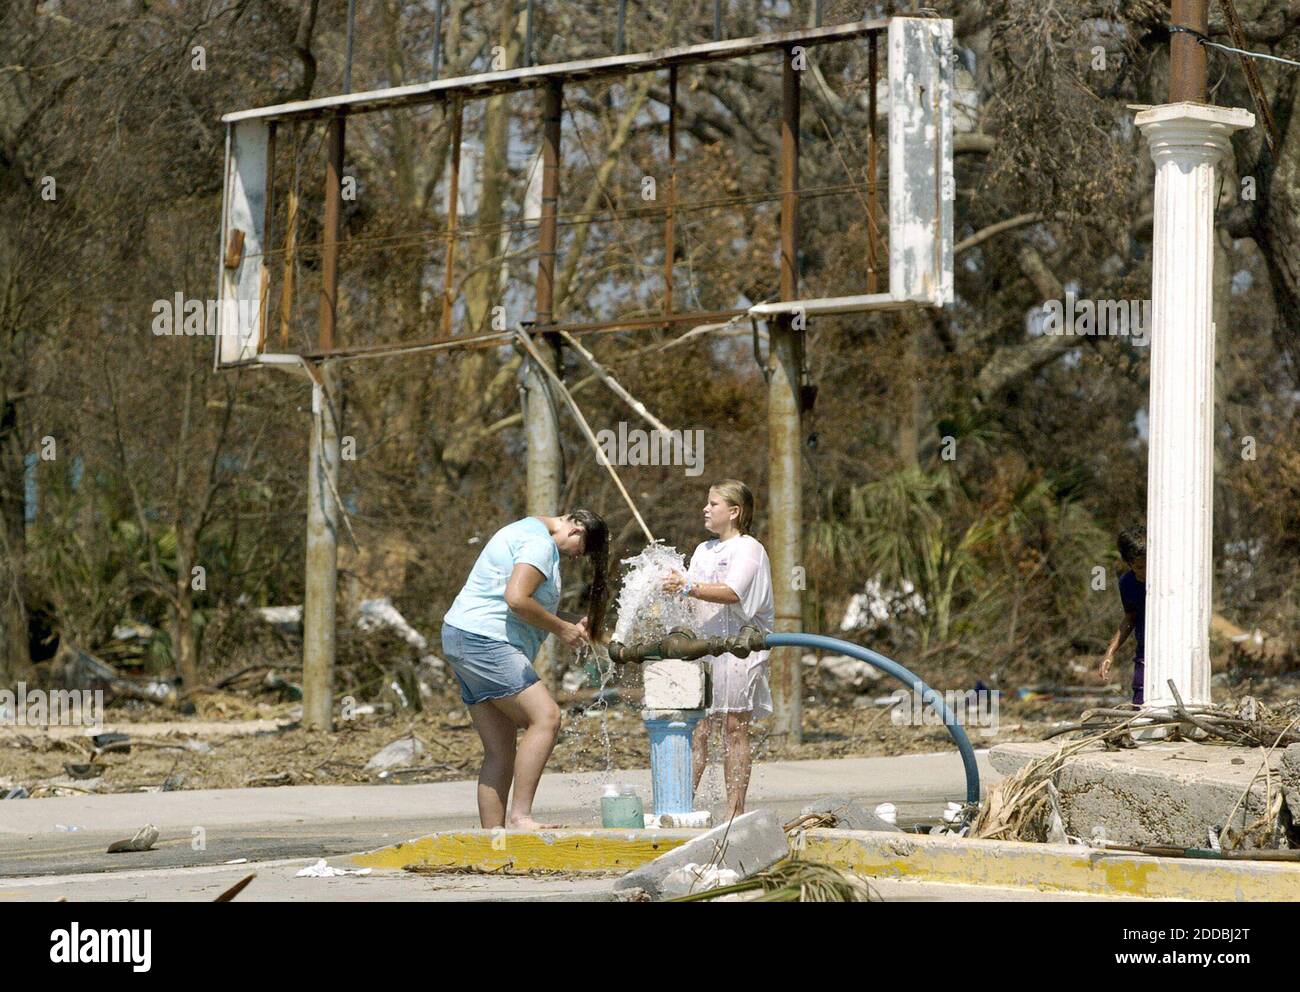 NO FILM, NO VIDEO, NO TV, NO DOCUMENTARY - Wandy Lamey (L) gets help from Dannelle Wright in washing her hair at a hydrant in Biloxi, Mississippi, USA, on Friday, September 2, 2005. Photo by Karl Mondon/Contra Costa Times/KRT/ABACAPRESS.COM Stock Photo